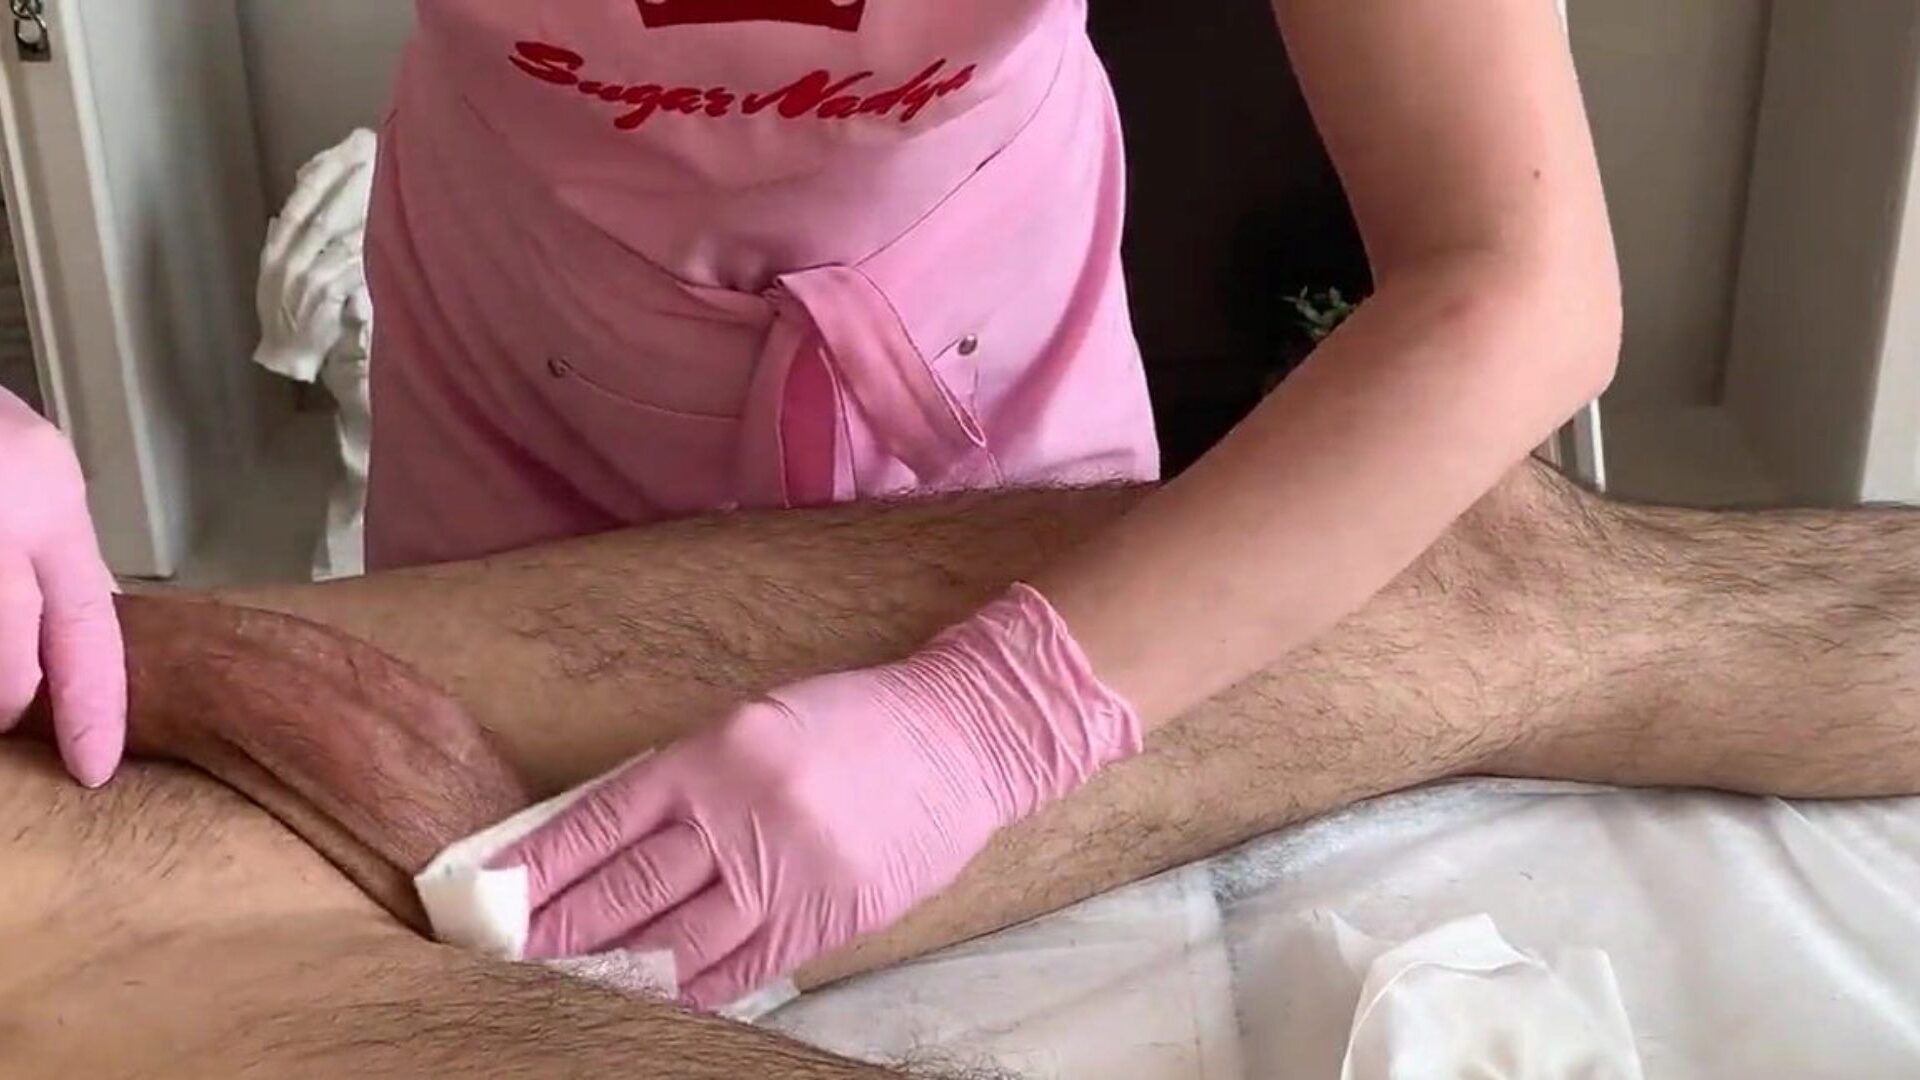 A plenty of of sperm - jizz flow during waxing SugarNadya did not expect to watch so much ball batter from the client during cumshot